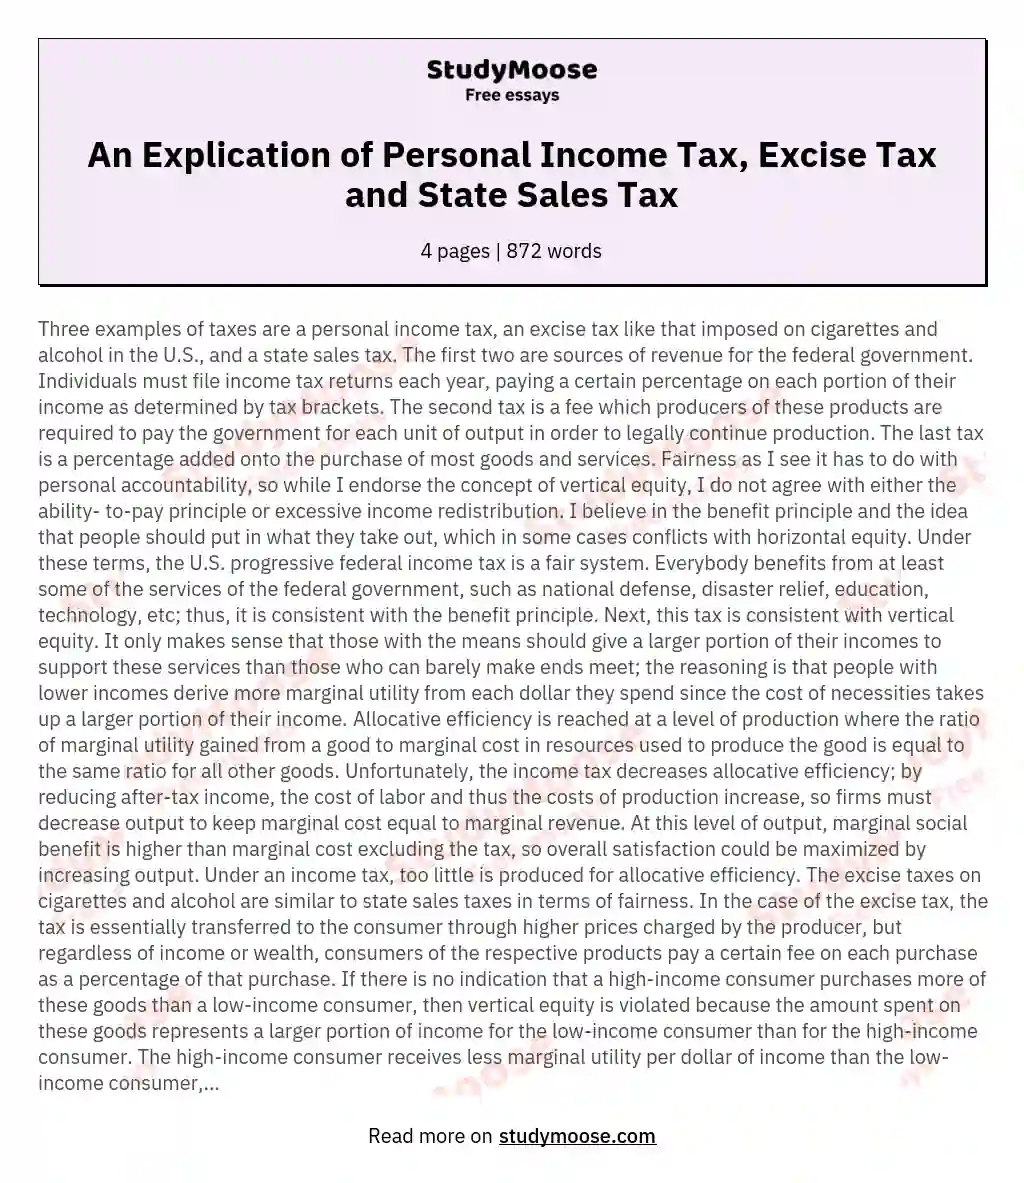 An Explication of Personal Income Tax, Excise Tax and State Sales Tax essay